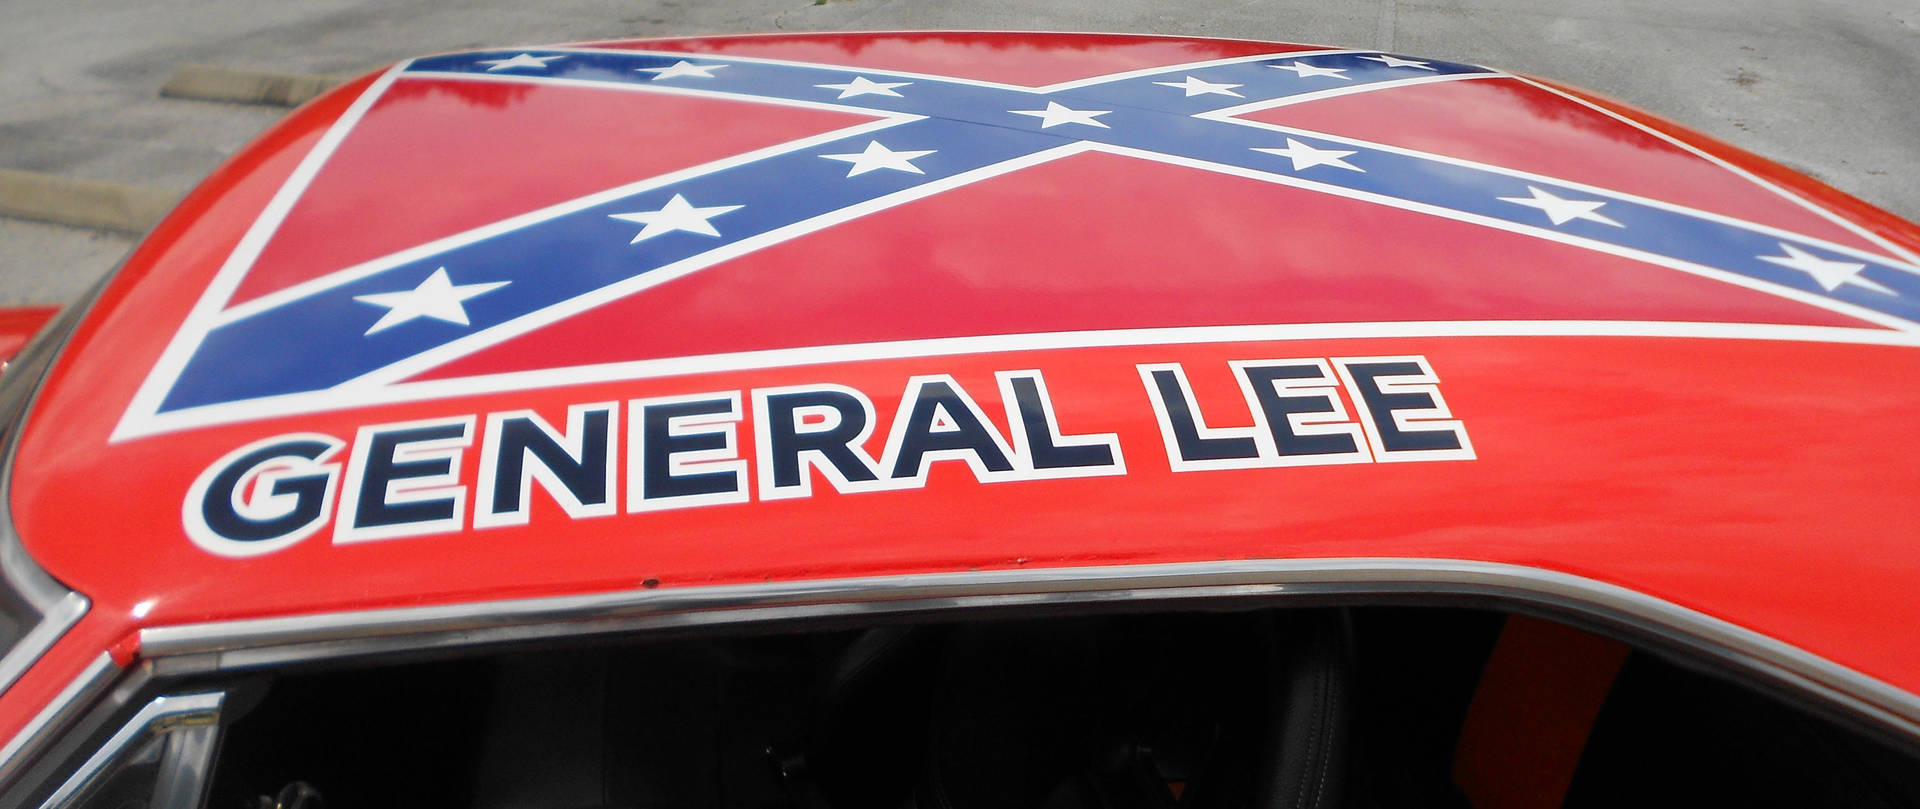 A Car With The Word General Lee On The Hood Wallpaper